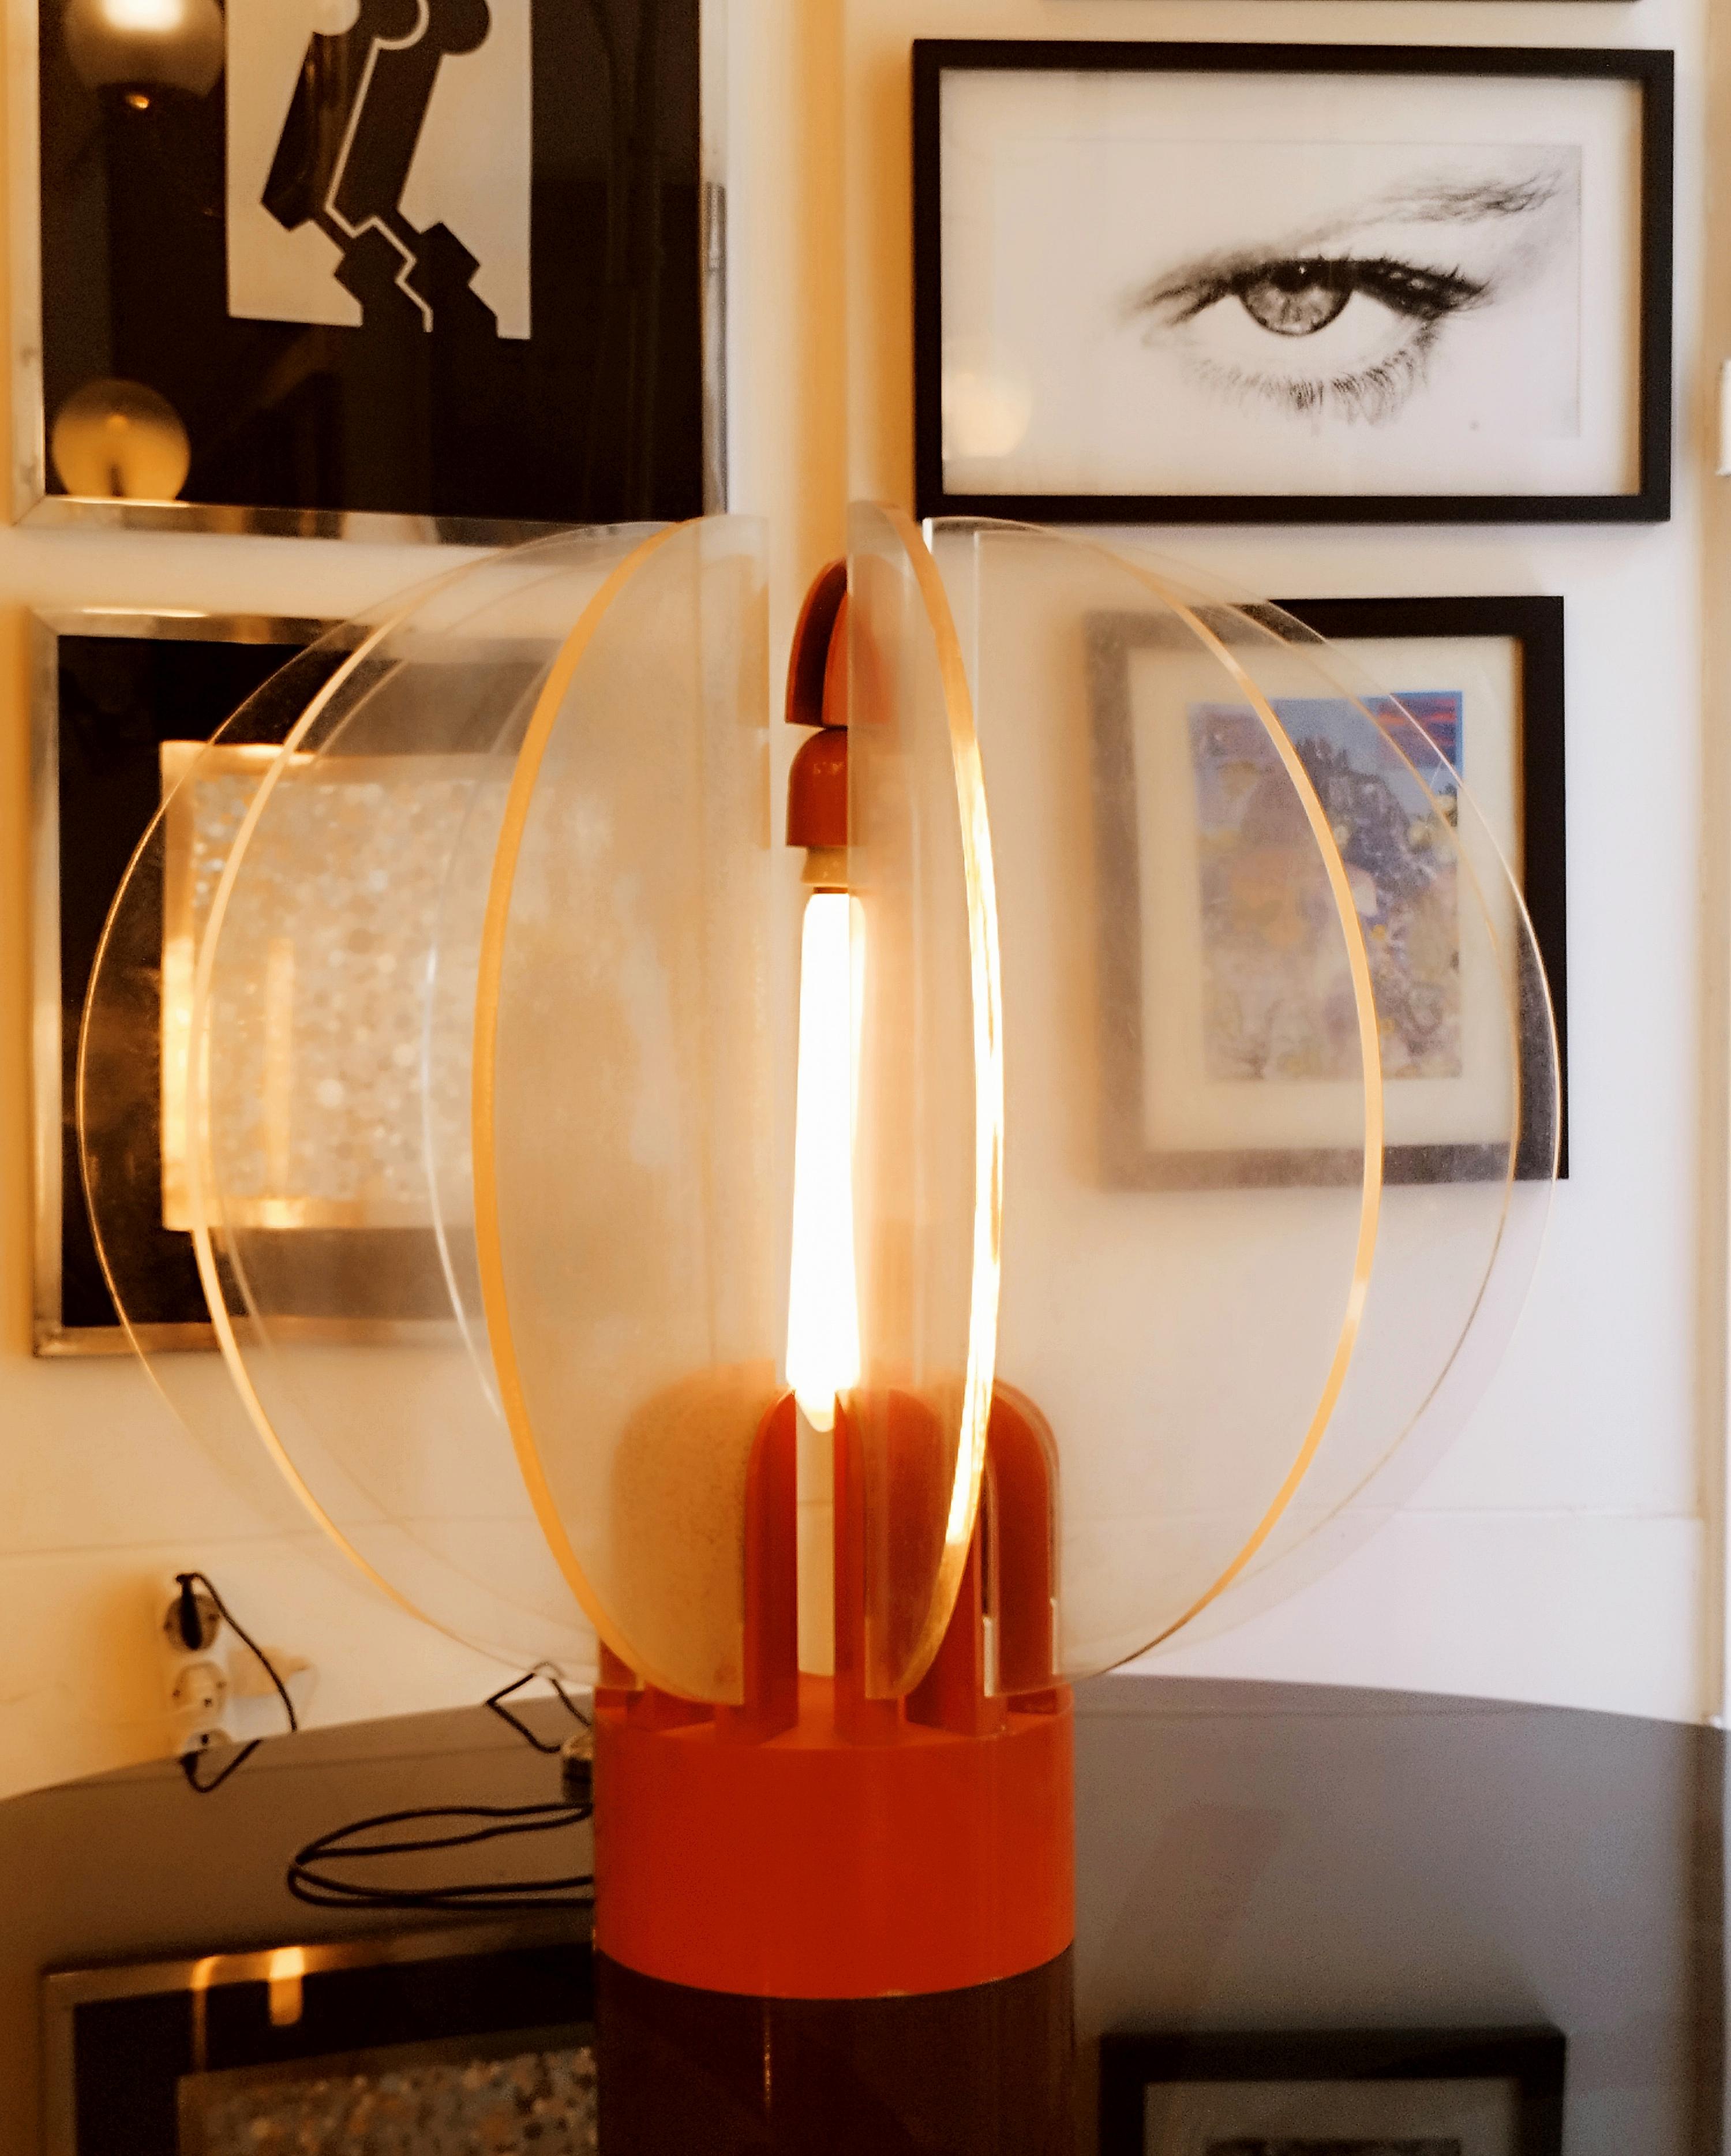 This 'King Sun' lighting object was created by Gae Aulenti for Kartell in 1967. The lamp was specially designed for the Olivetti showroom in Buenos Aires, Argentina. Aulenti herself designed the shop reminiscent of a 'piazza' dominated by curved